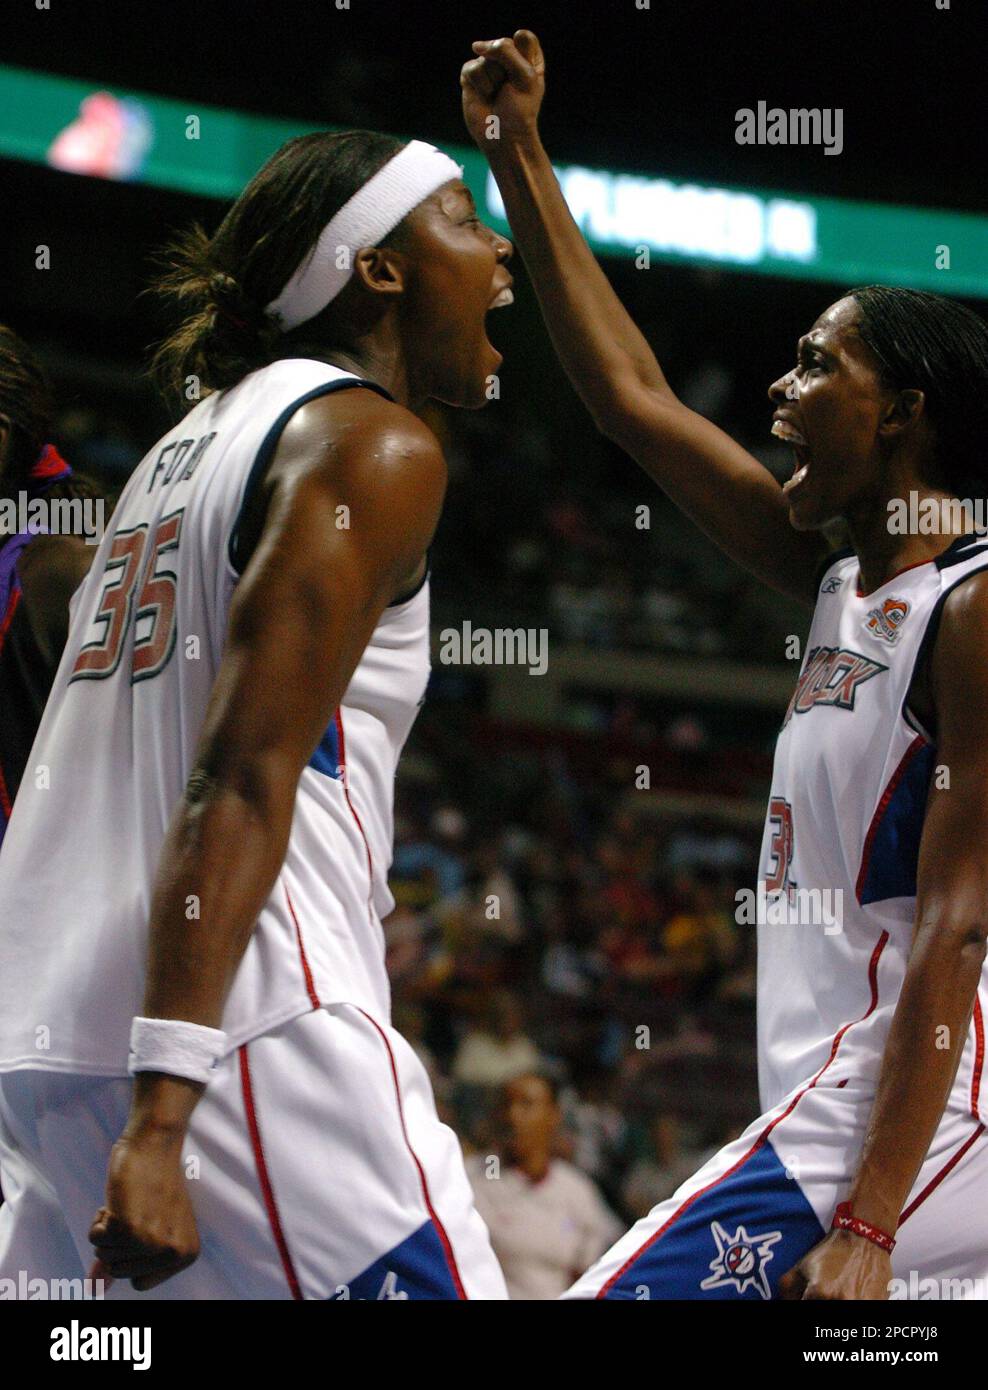 https://c8.alamy.com/comp/2PCPYJ8/detroit-shocks-cheryl-ford-left-celebrates-a-foul-and-possible-three-point-play-against-her-with-teammate-swin-cash-during-the-second-half-of-their-wnba-basketball-game-against-sacramento-monarchs-on-wednesday-july-26-2006-in-auburn-hills-mich-the-shock-won-91-71-ap-photojerry-s-mendoza-2PCPYJ8.jpg